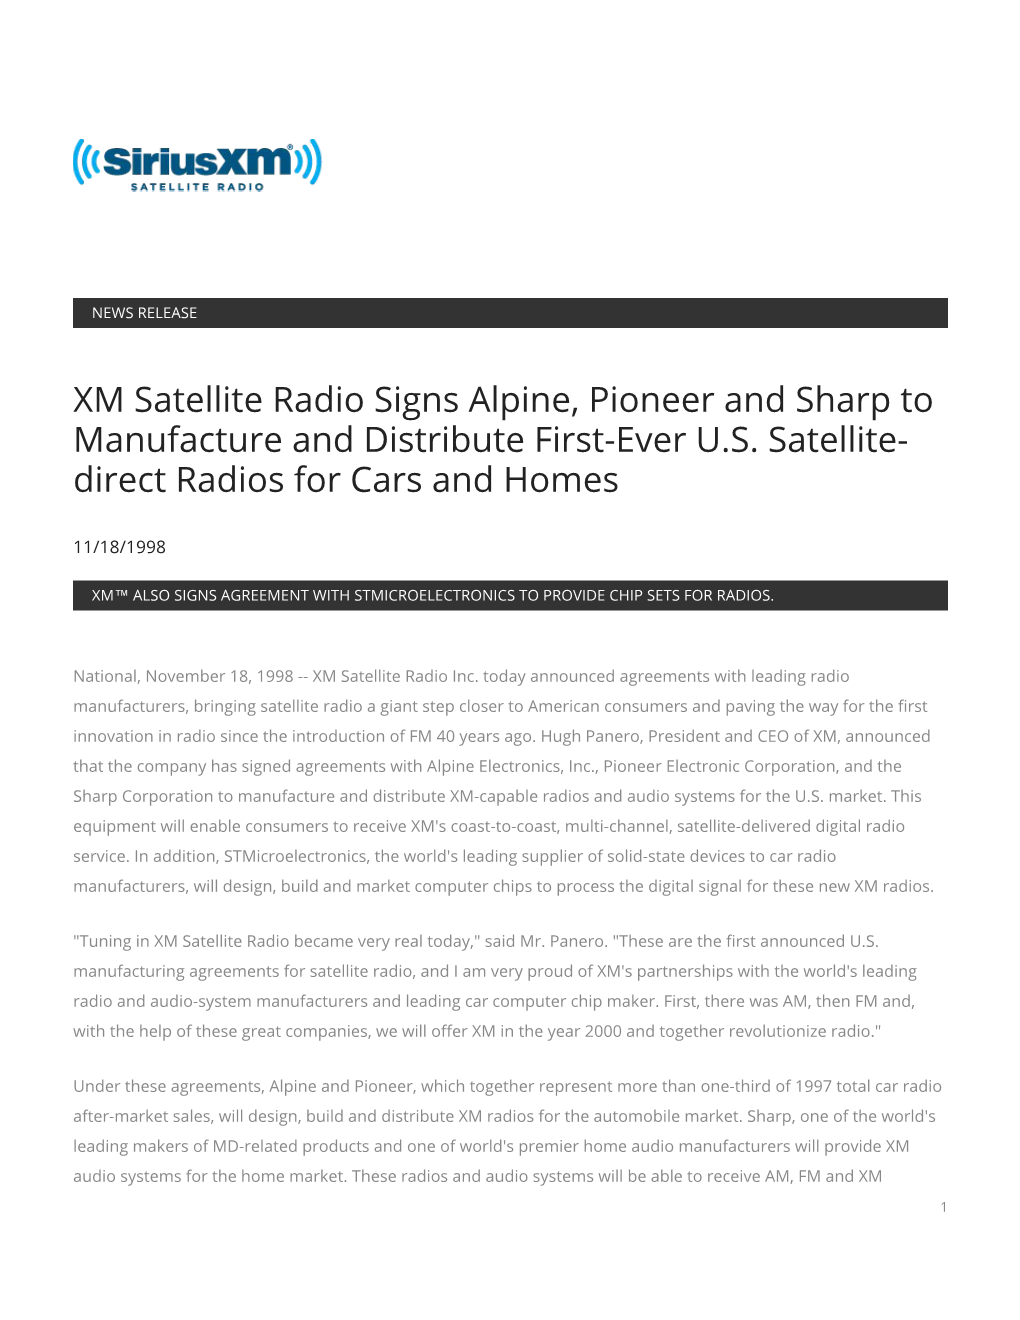 XM Satellite Radio Signs Alpine, Pioneer and Sharp to Manufacture and Distribute First-Ever U.S